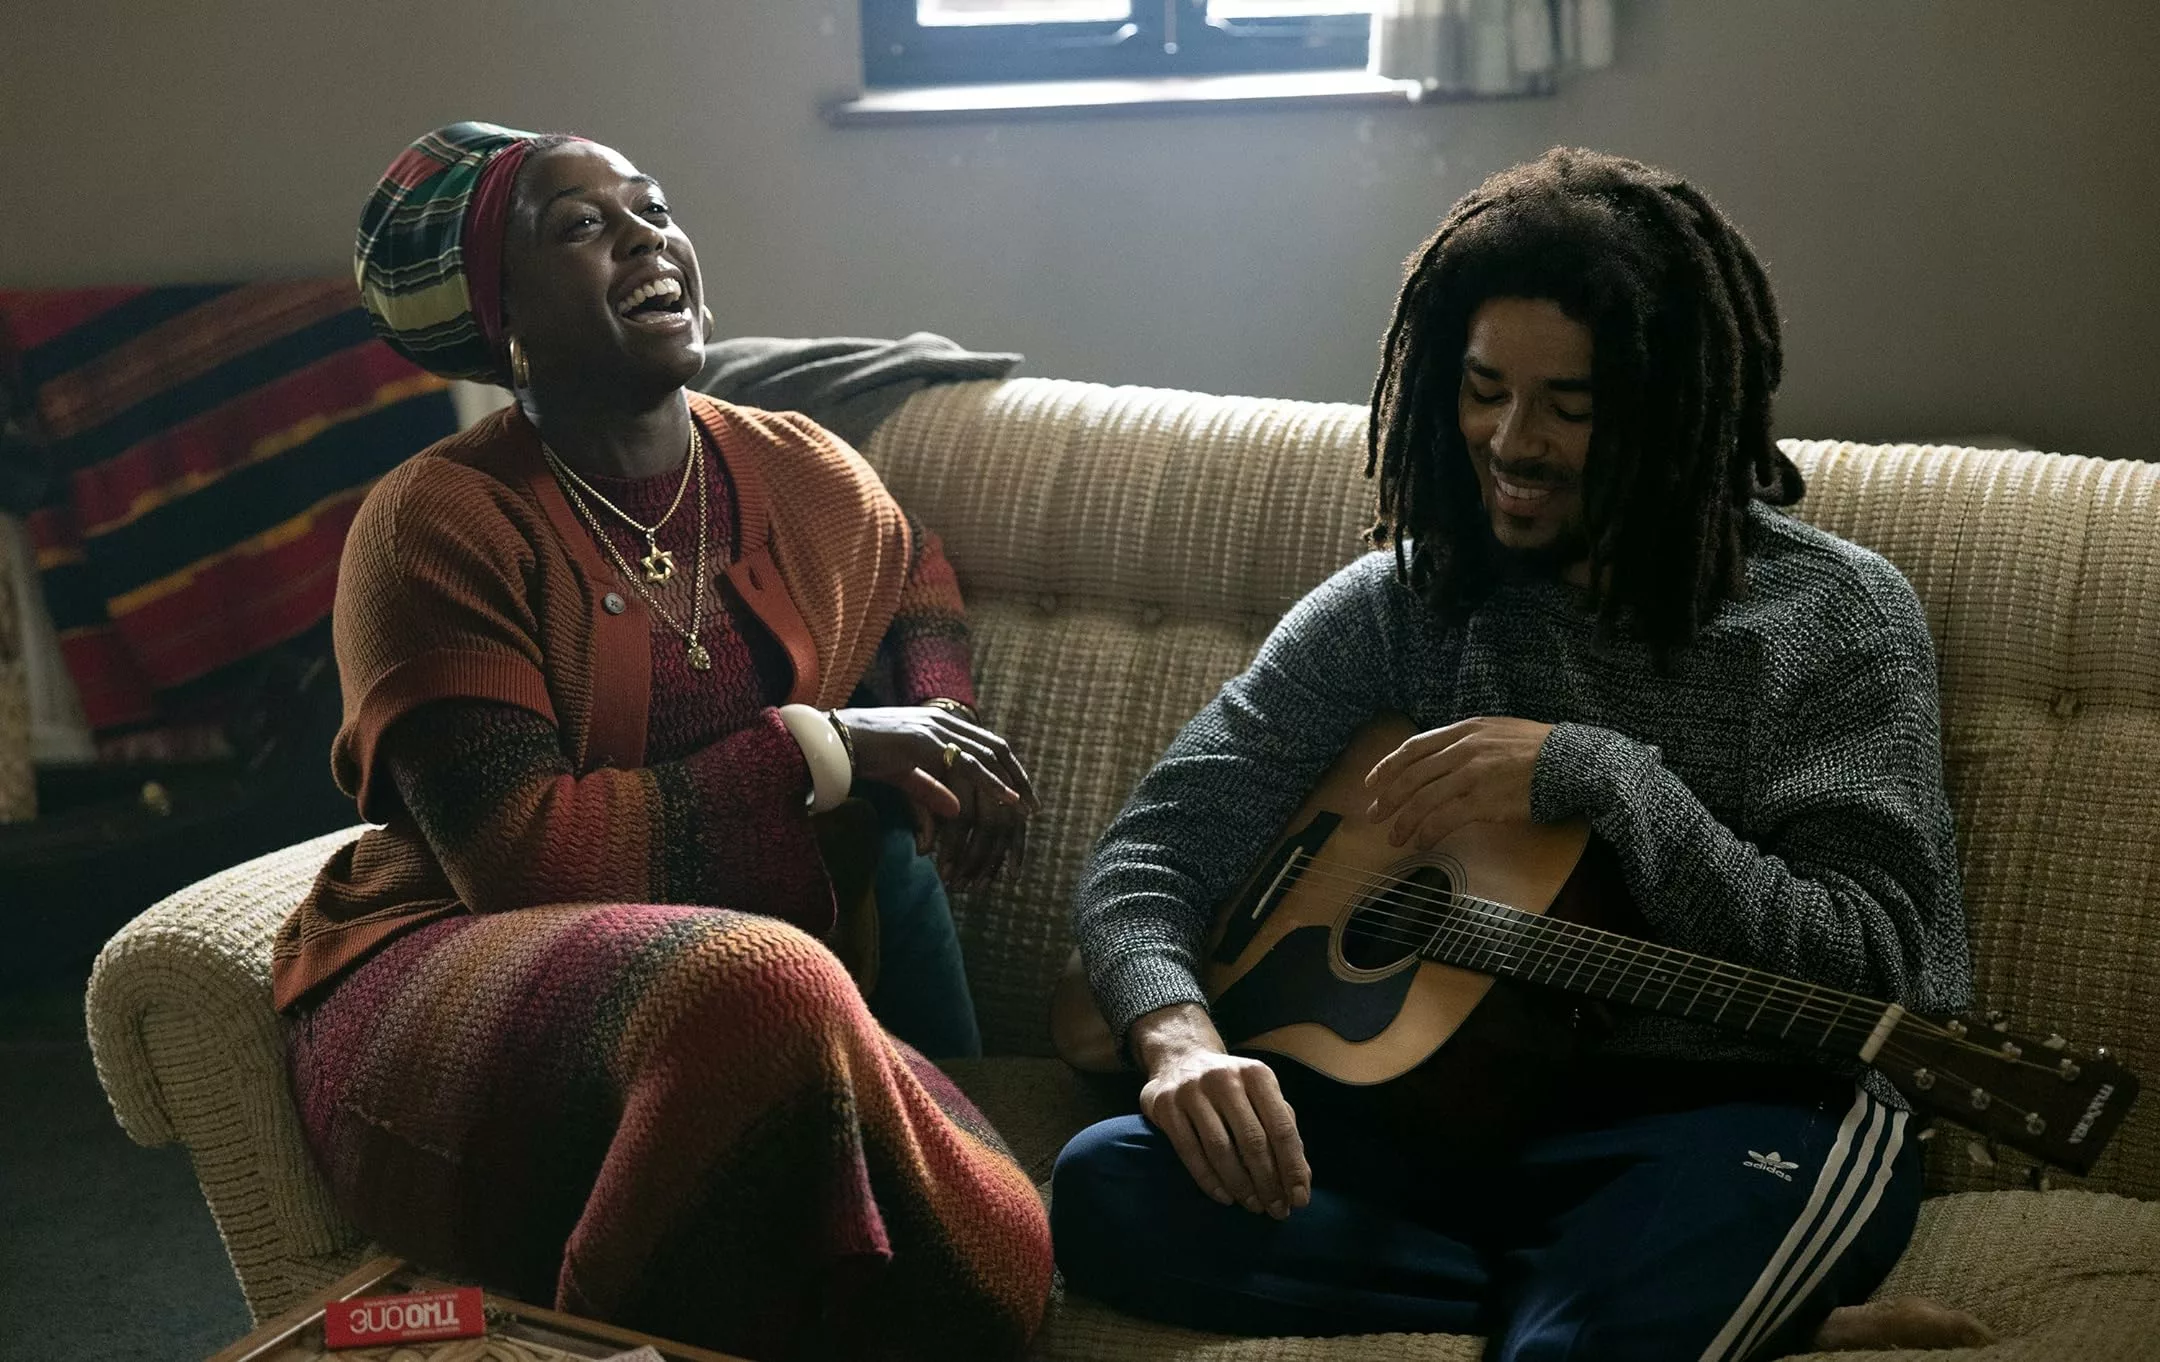 Bob Marley: One Love Review